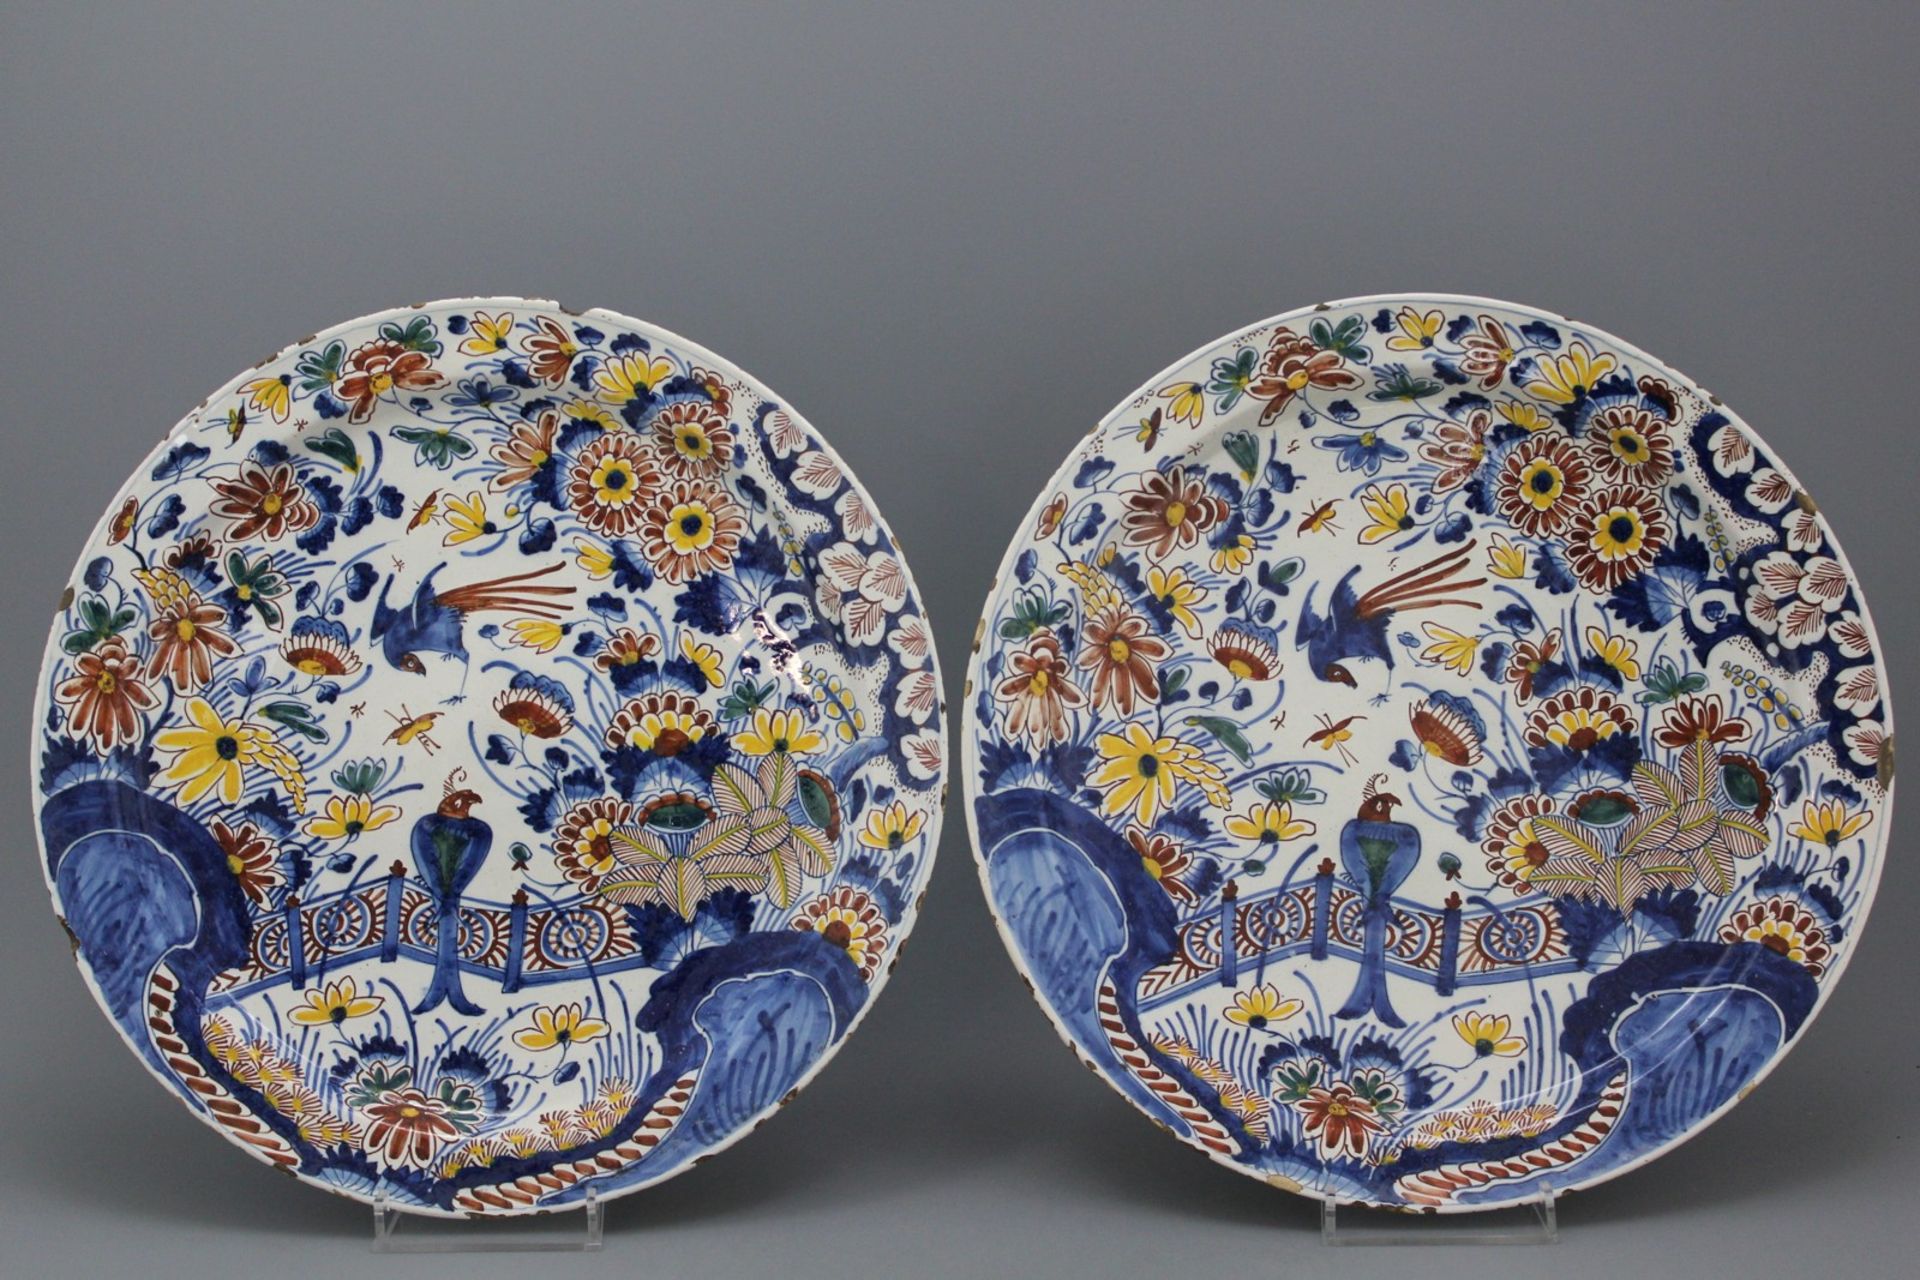 A pair of large polcyhrome Dutch Delft dishes with birds and flowers, 17th C. A pair of large